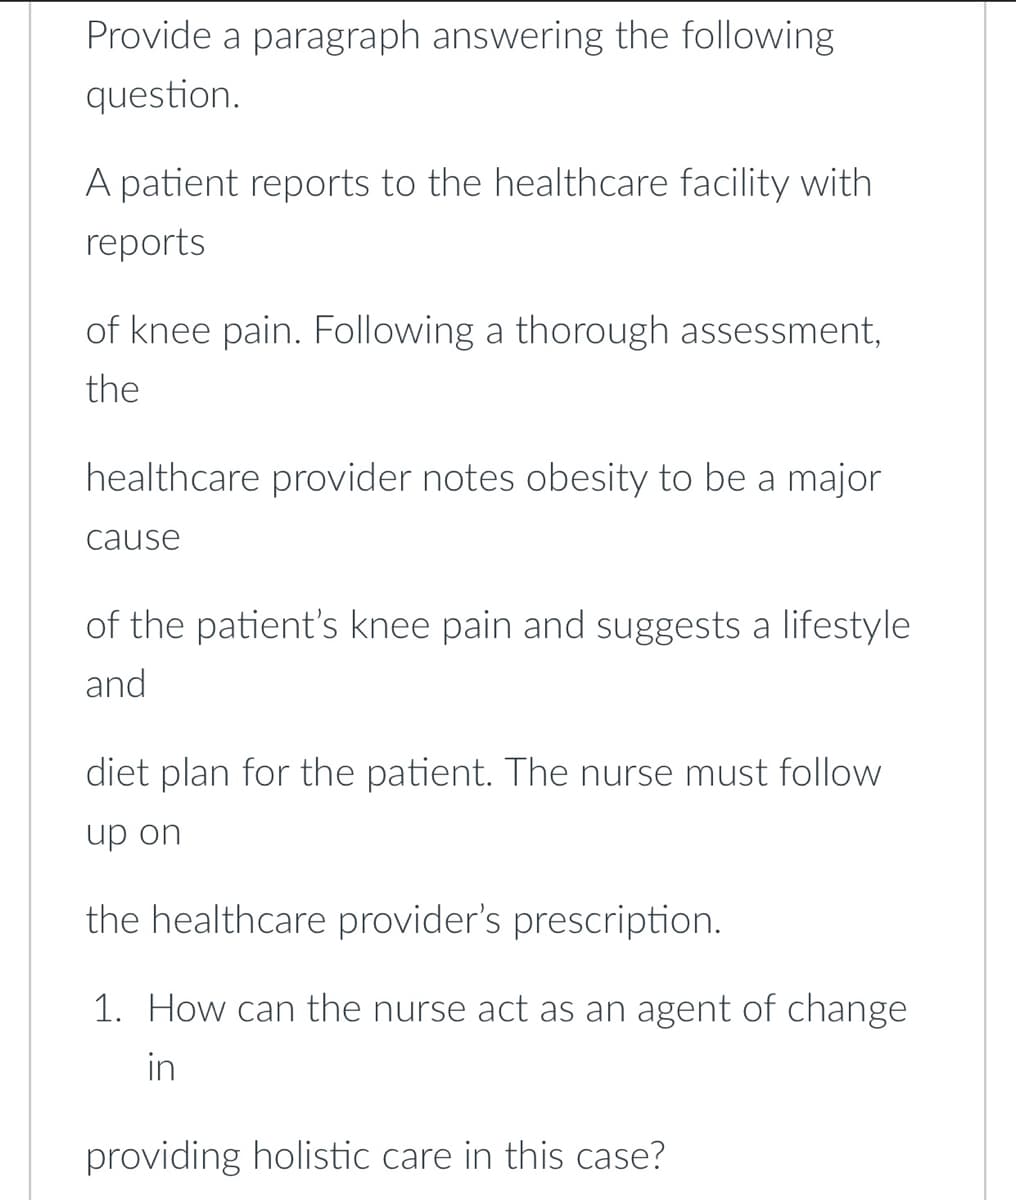 Provide a paragraph answering the following
question.
A patient reports to the healthcare facility with
reports
of knee pain. Following a thorough assessment,
the
healthcare provider notes obesity to be a major
cause
of the patient's knee pain and suggests a lifestyle
and
diet plan for the patient. The nurse must follow
up on
the healthcare provider's prescription.
1. How can the nurse act as an agent of change
in
providing holistic care in this case?